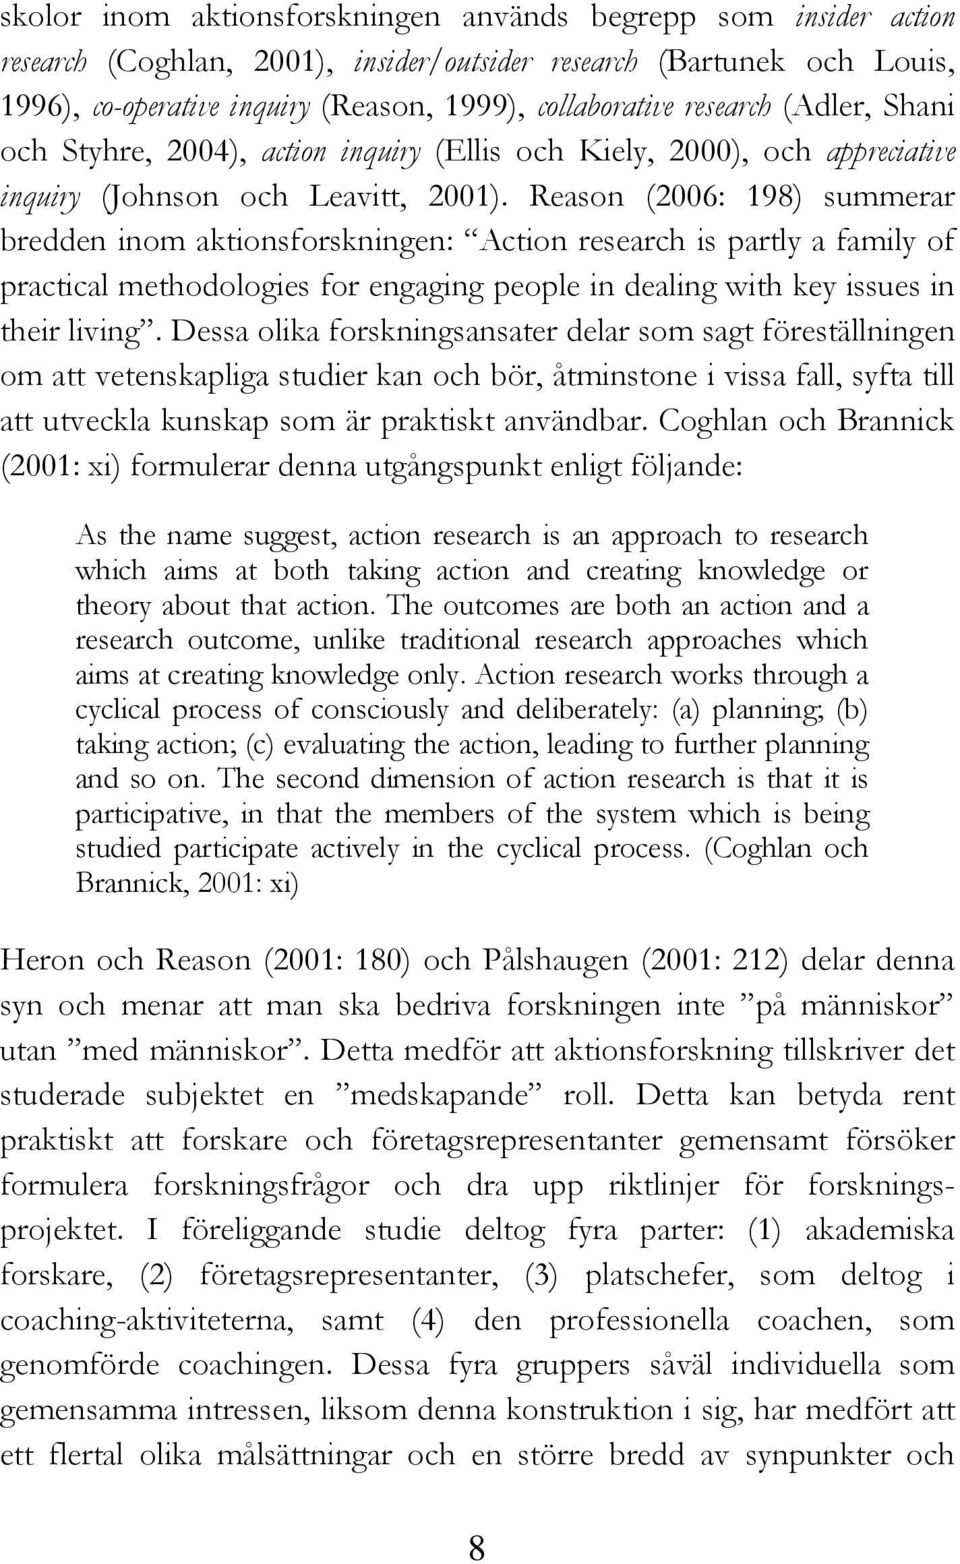 Reason (2006: 198) summerar bredden inom aktionsforskningen: Action research is partly a family of practical methodologies for engaging people in dealing with key issues in their living.